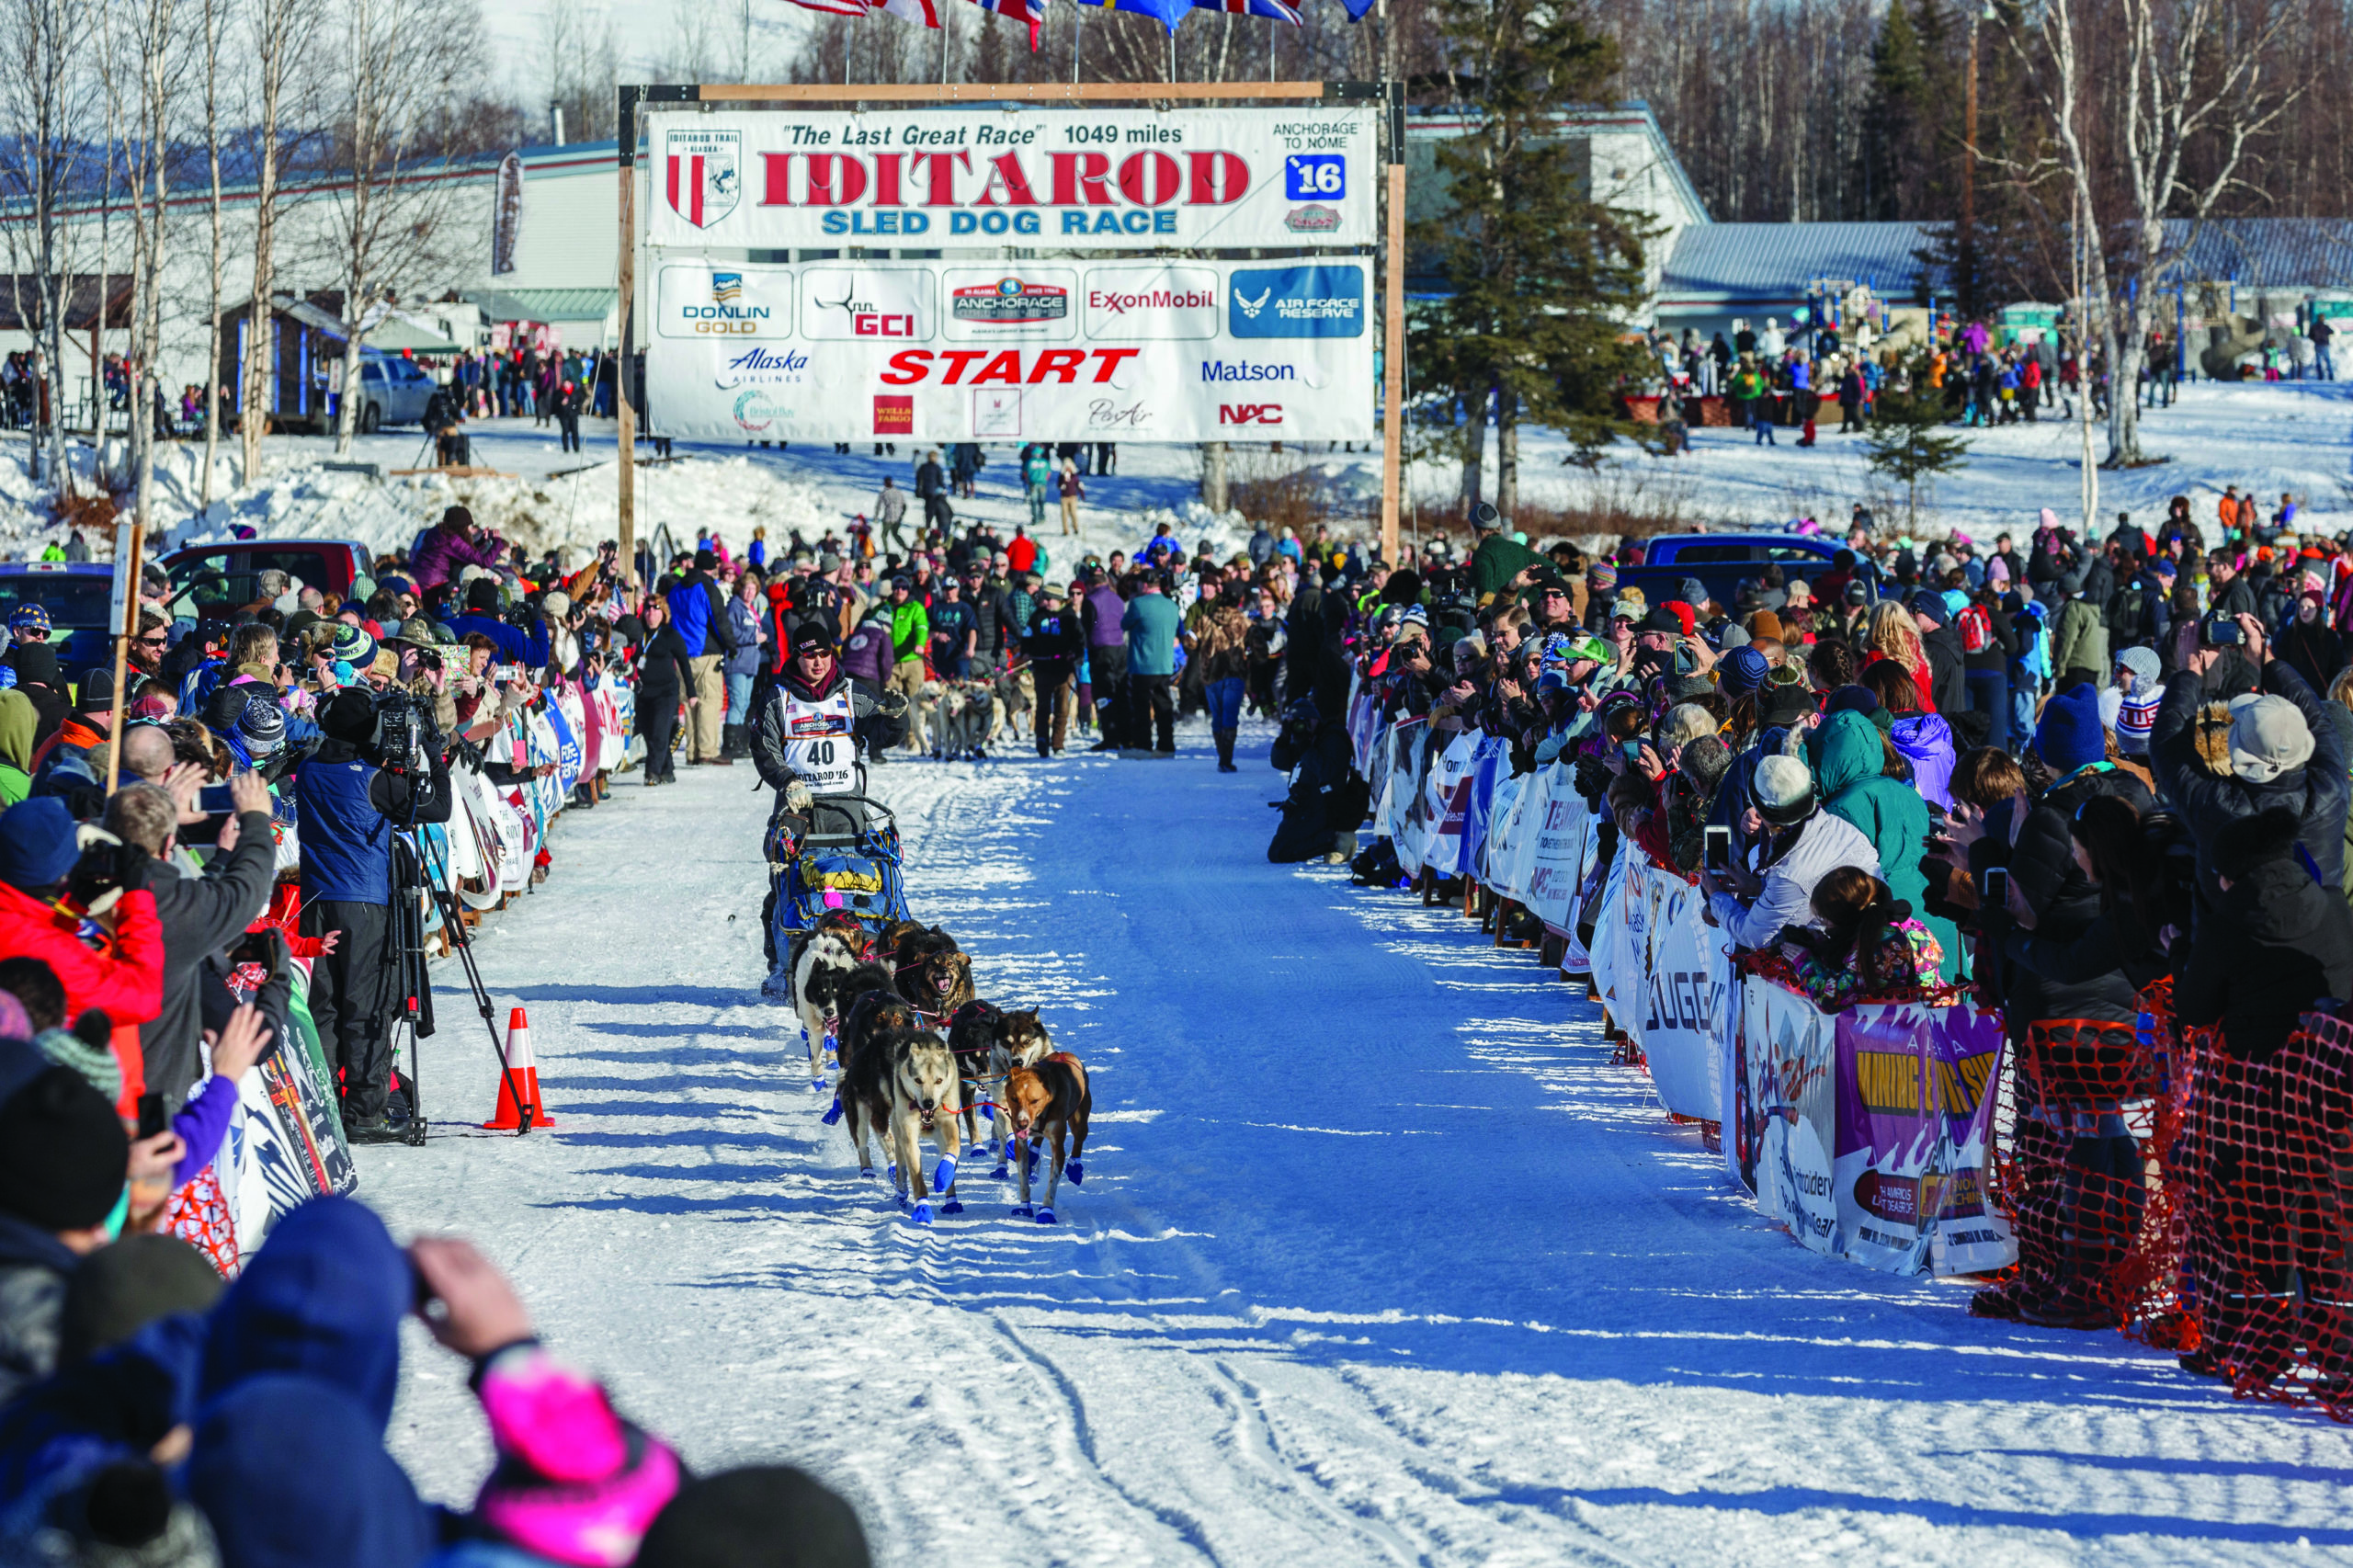 Mike Williams Jr. as he leaves the start during 2016 Iditarod.